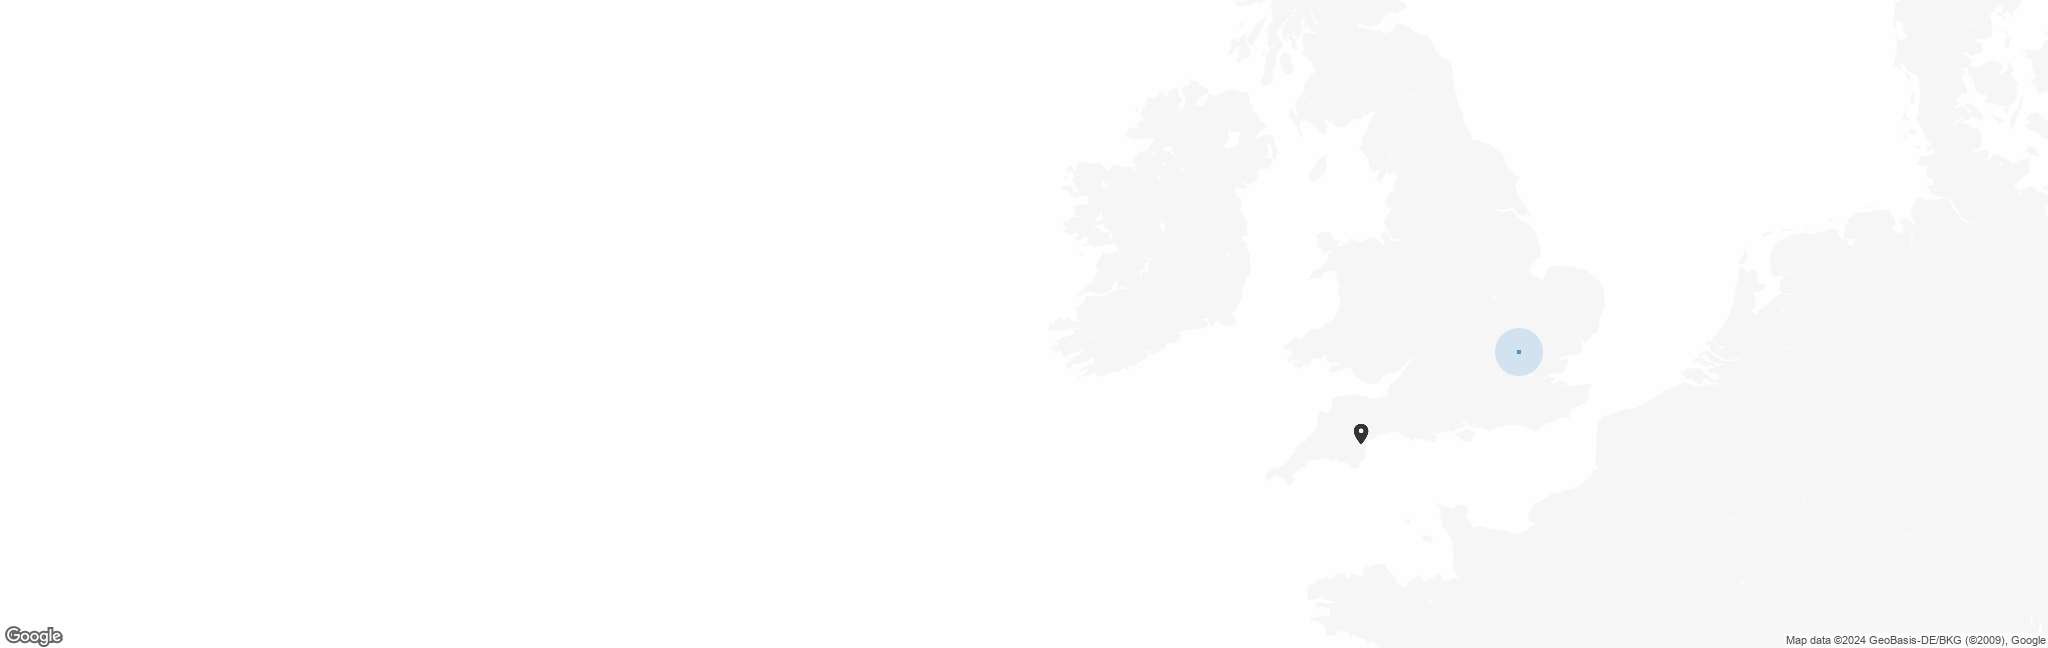 Map of GB with pin of South Devon Hedgehog Hospital location